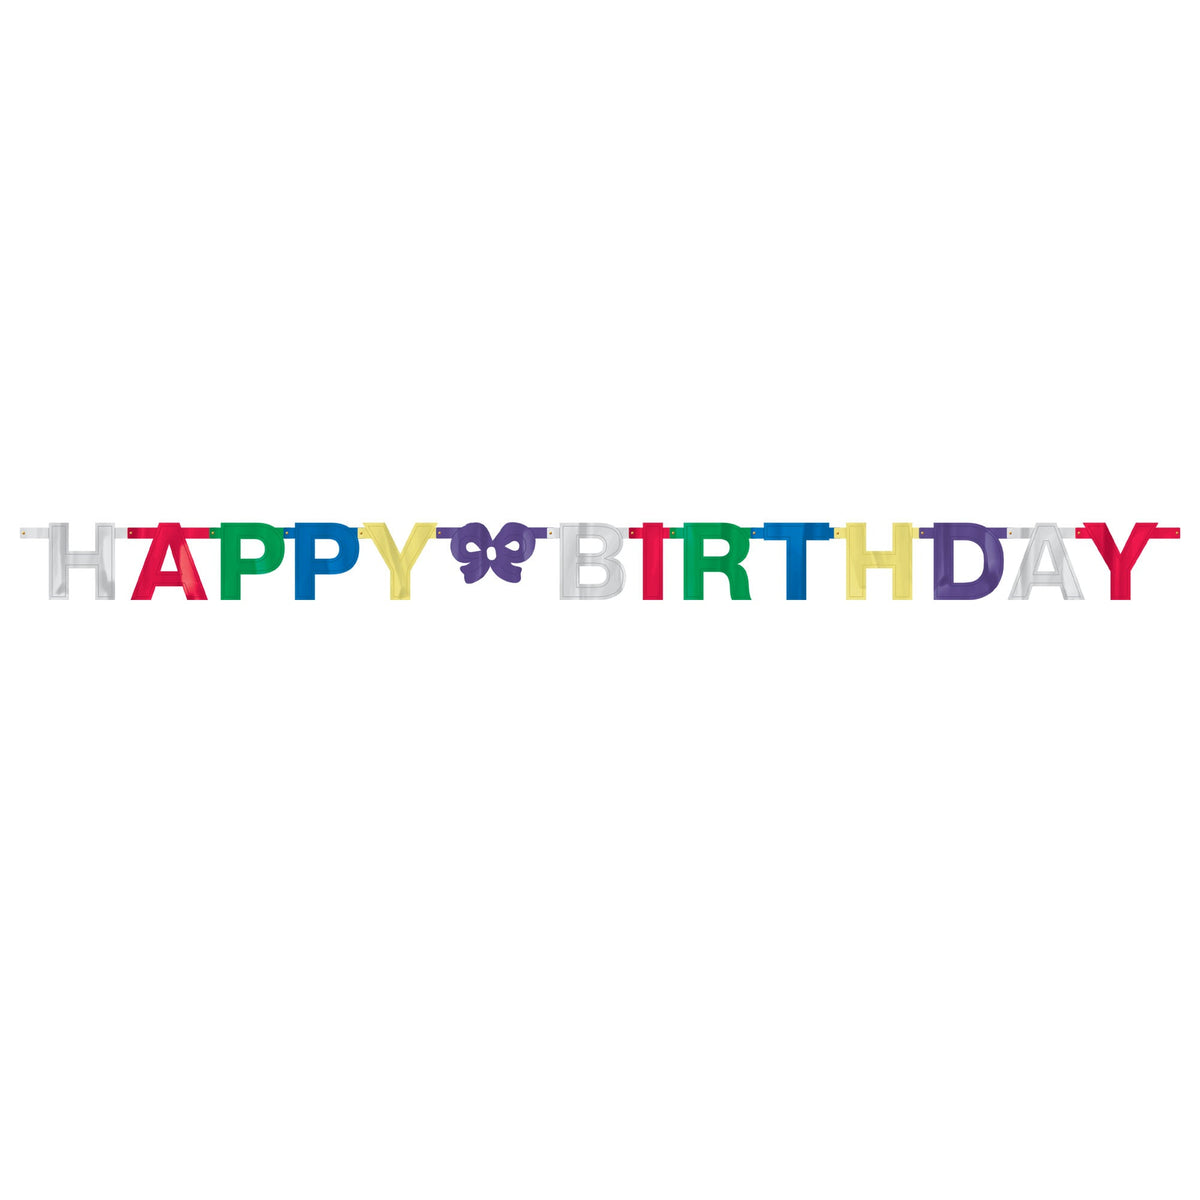 Happy Birthday Multicolored Letter Banner